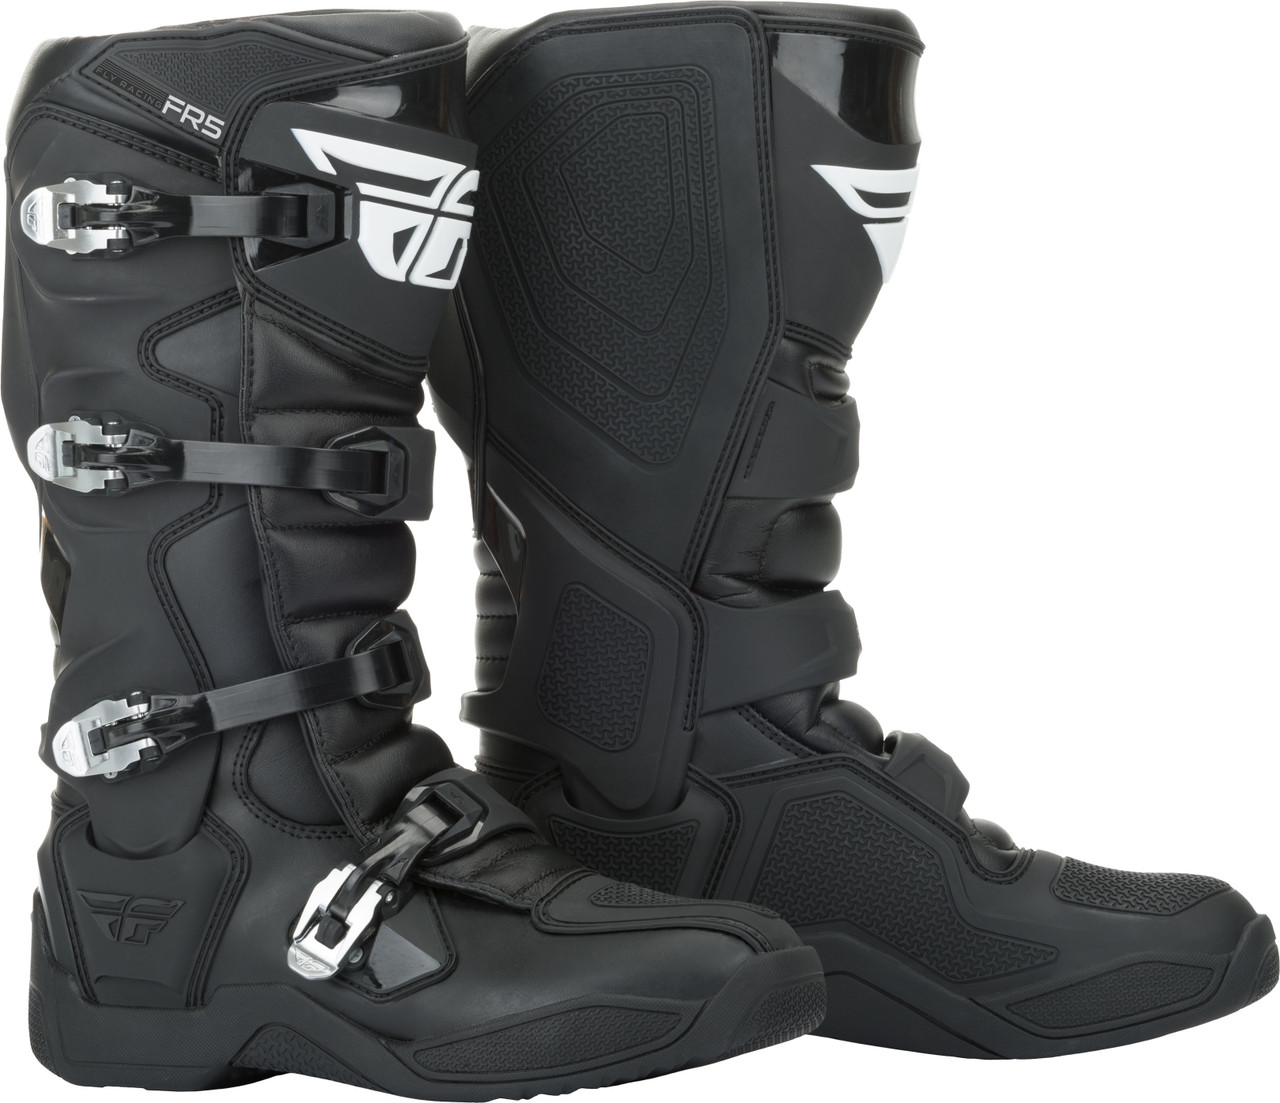 Fly Racing New Fr5 Boots Black Sz 11, 364-70011